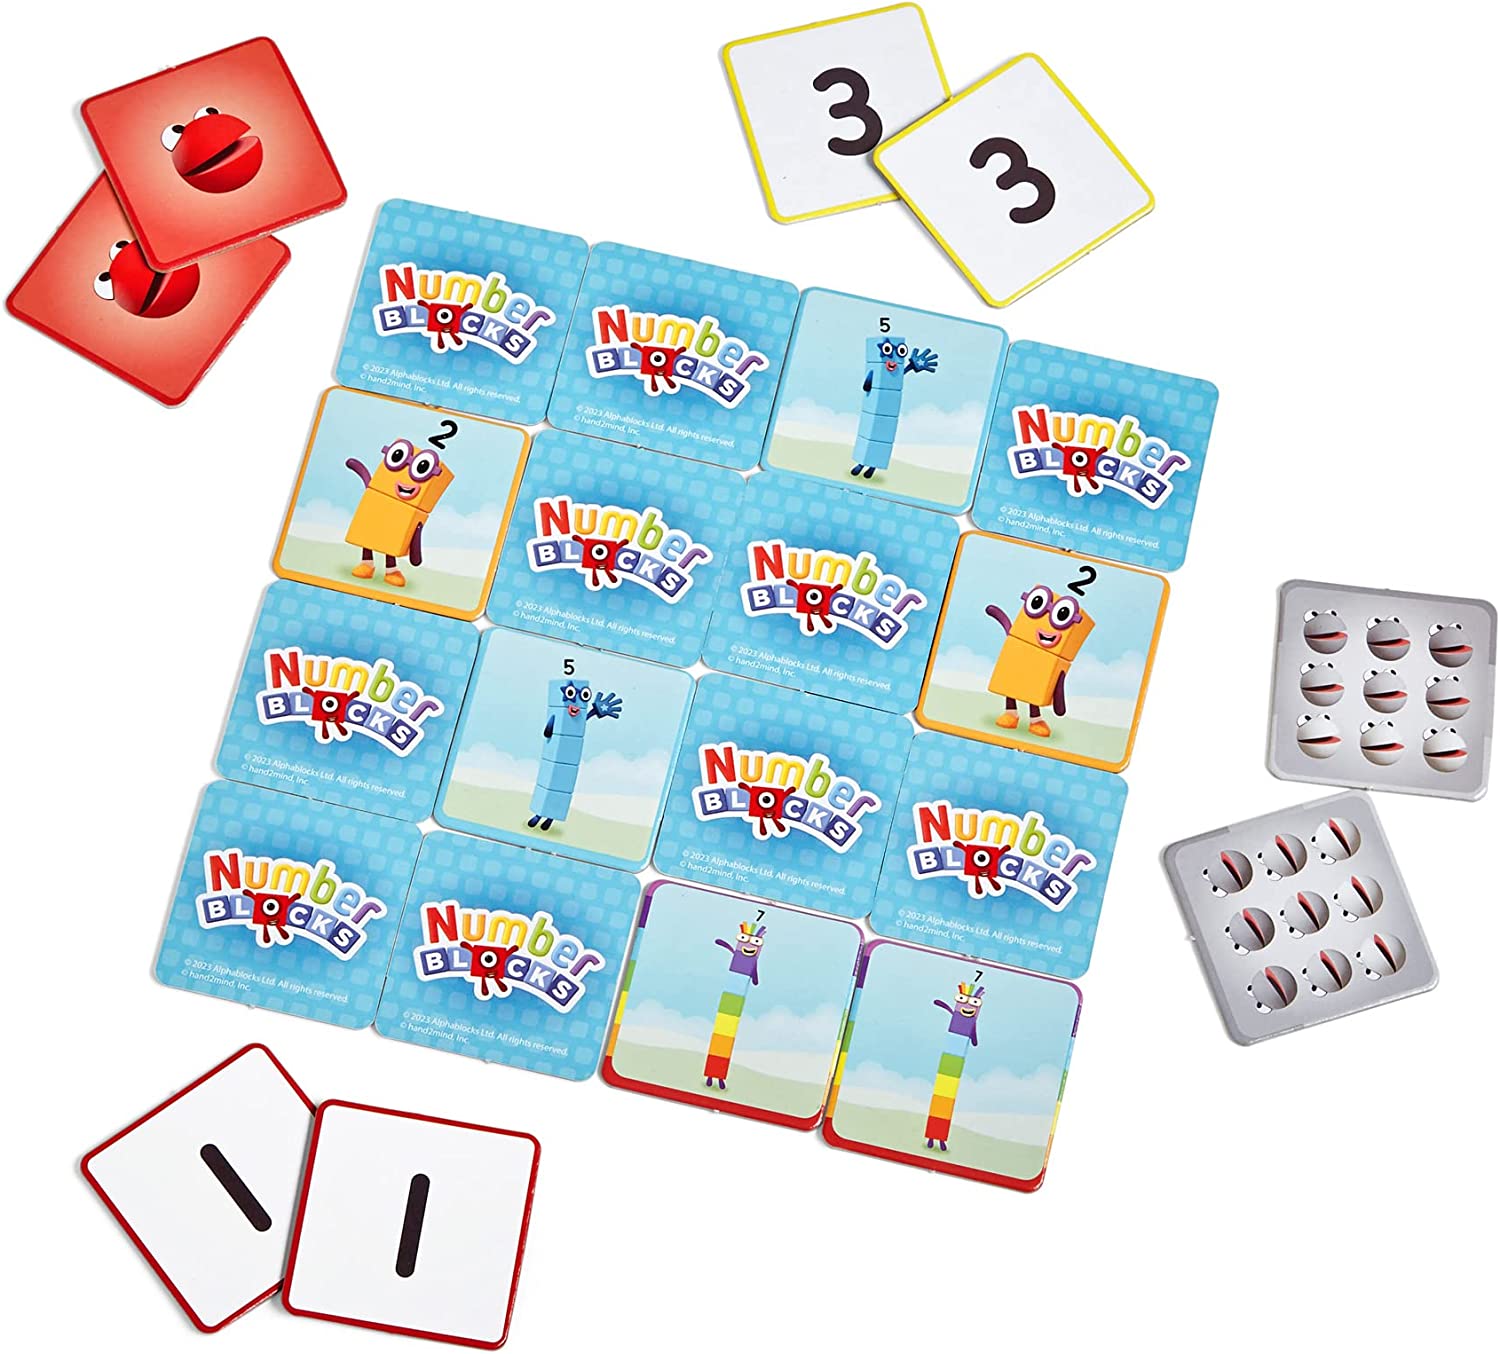 Numberblocks Memory Match Game, Children will have lots of fun finding and pairing with this engaging Numberblocks game inspired by the hit CBeebies TV series. There are four ways to match - by Numberblocks One to Ten, Numberblobs, Number Fun, and Numberlings. The sturdy, full colour cards are designed for little hands and have colour-coded borders for easy game set-up. Includes 80 cards. Suitable for one or more players. Flip over the cards to help the Numberblocks friends find their perfect matches with t